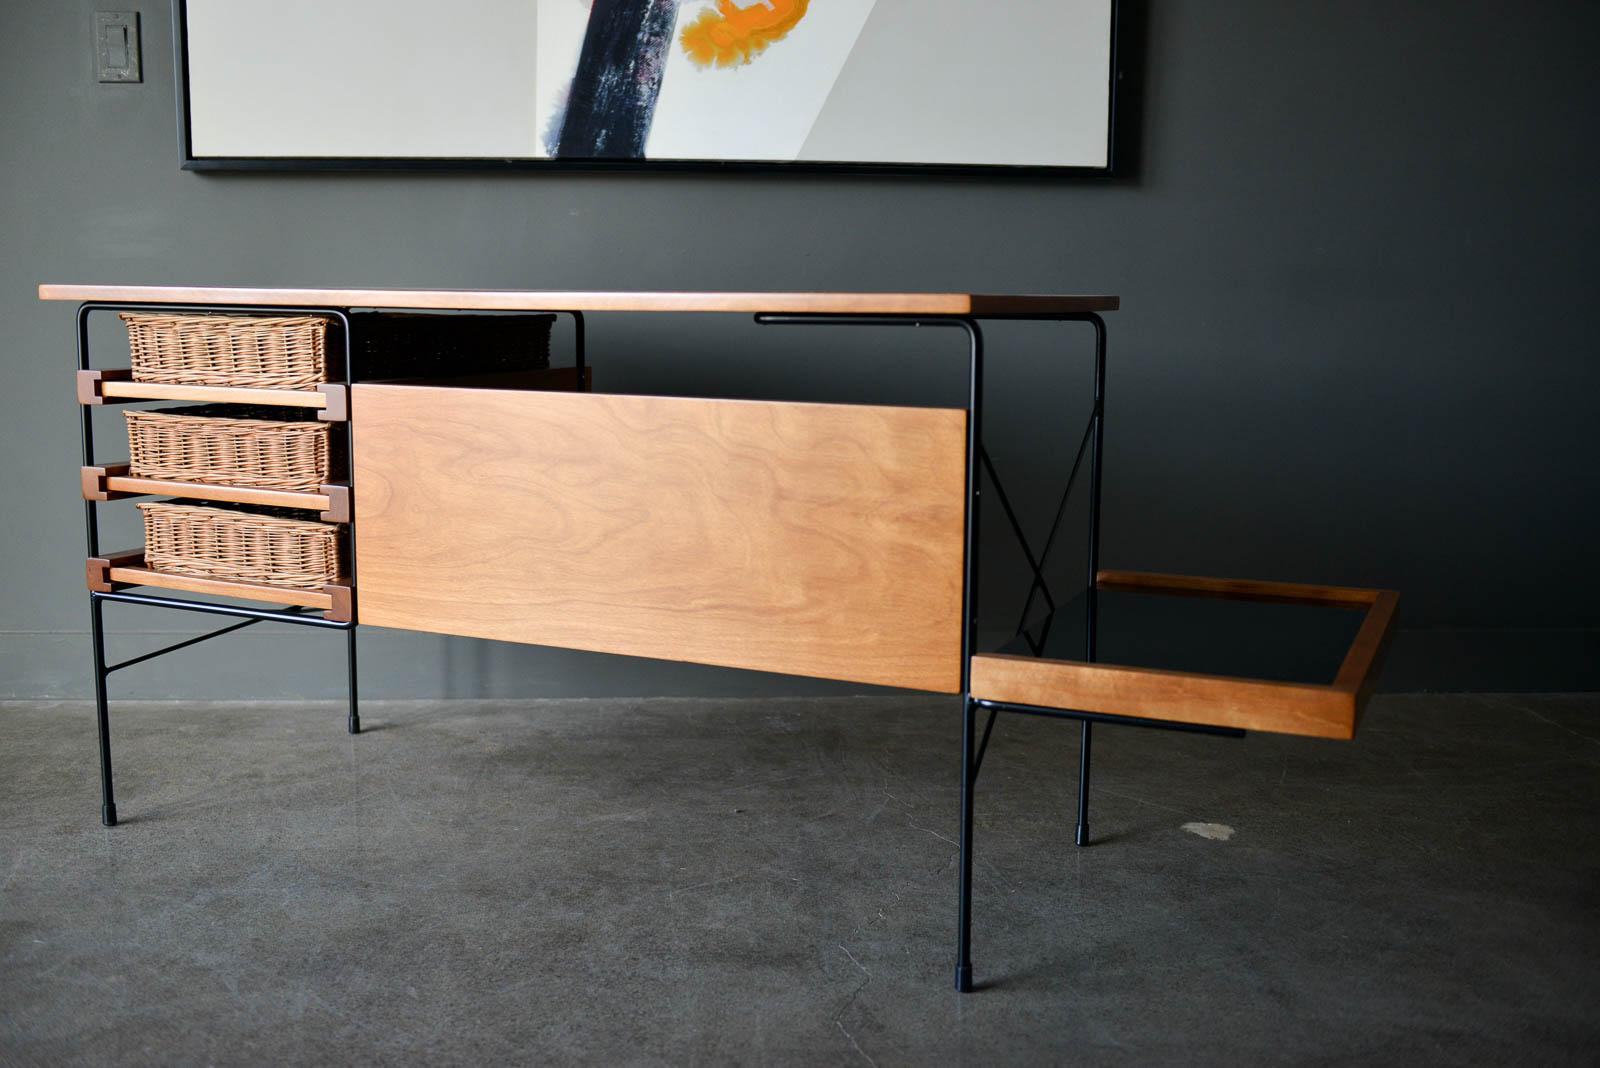 Mid-Century Modern Maple and Iron Desk by Dorothy Schindele for Modern Color, circa 1950